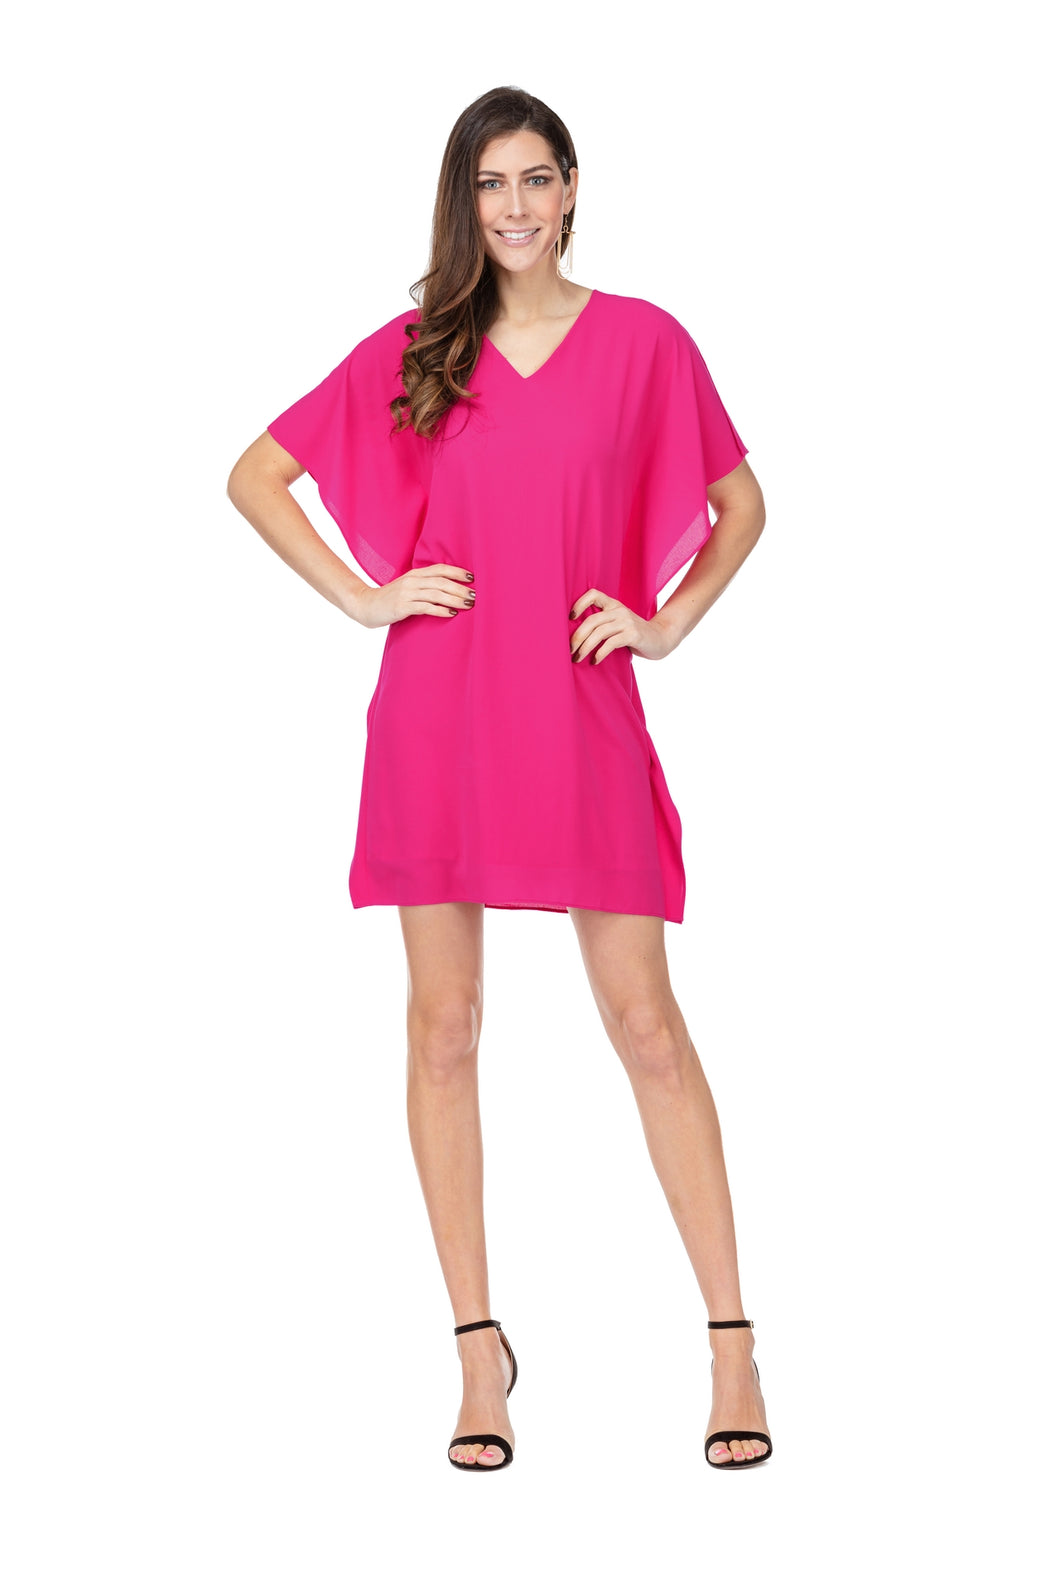 A gorgeous dress in a striking magenta color, our Melanie drape dress offers a stylish drape design that flatters the figure.  With split sleeves, v-neck, waterfall draping on the side and dramatic sleeves, the Melanie will get you noticed and give you compliments.   Color - Magenta. V-Neck. Waterfall draping on sides. Drape sleeves. Split sleeves.